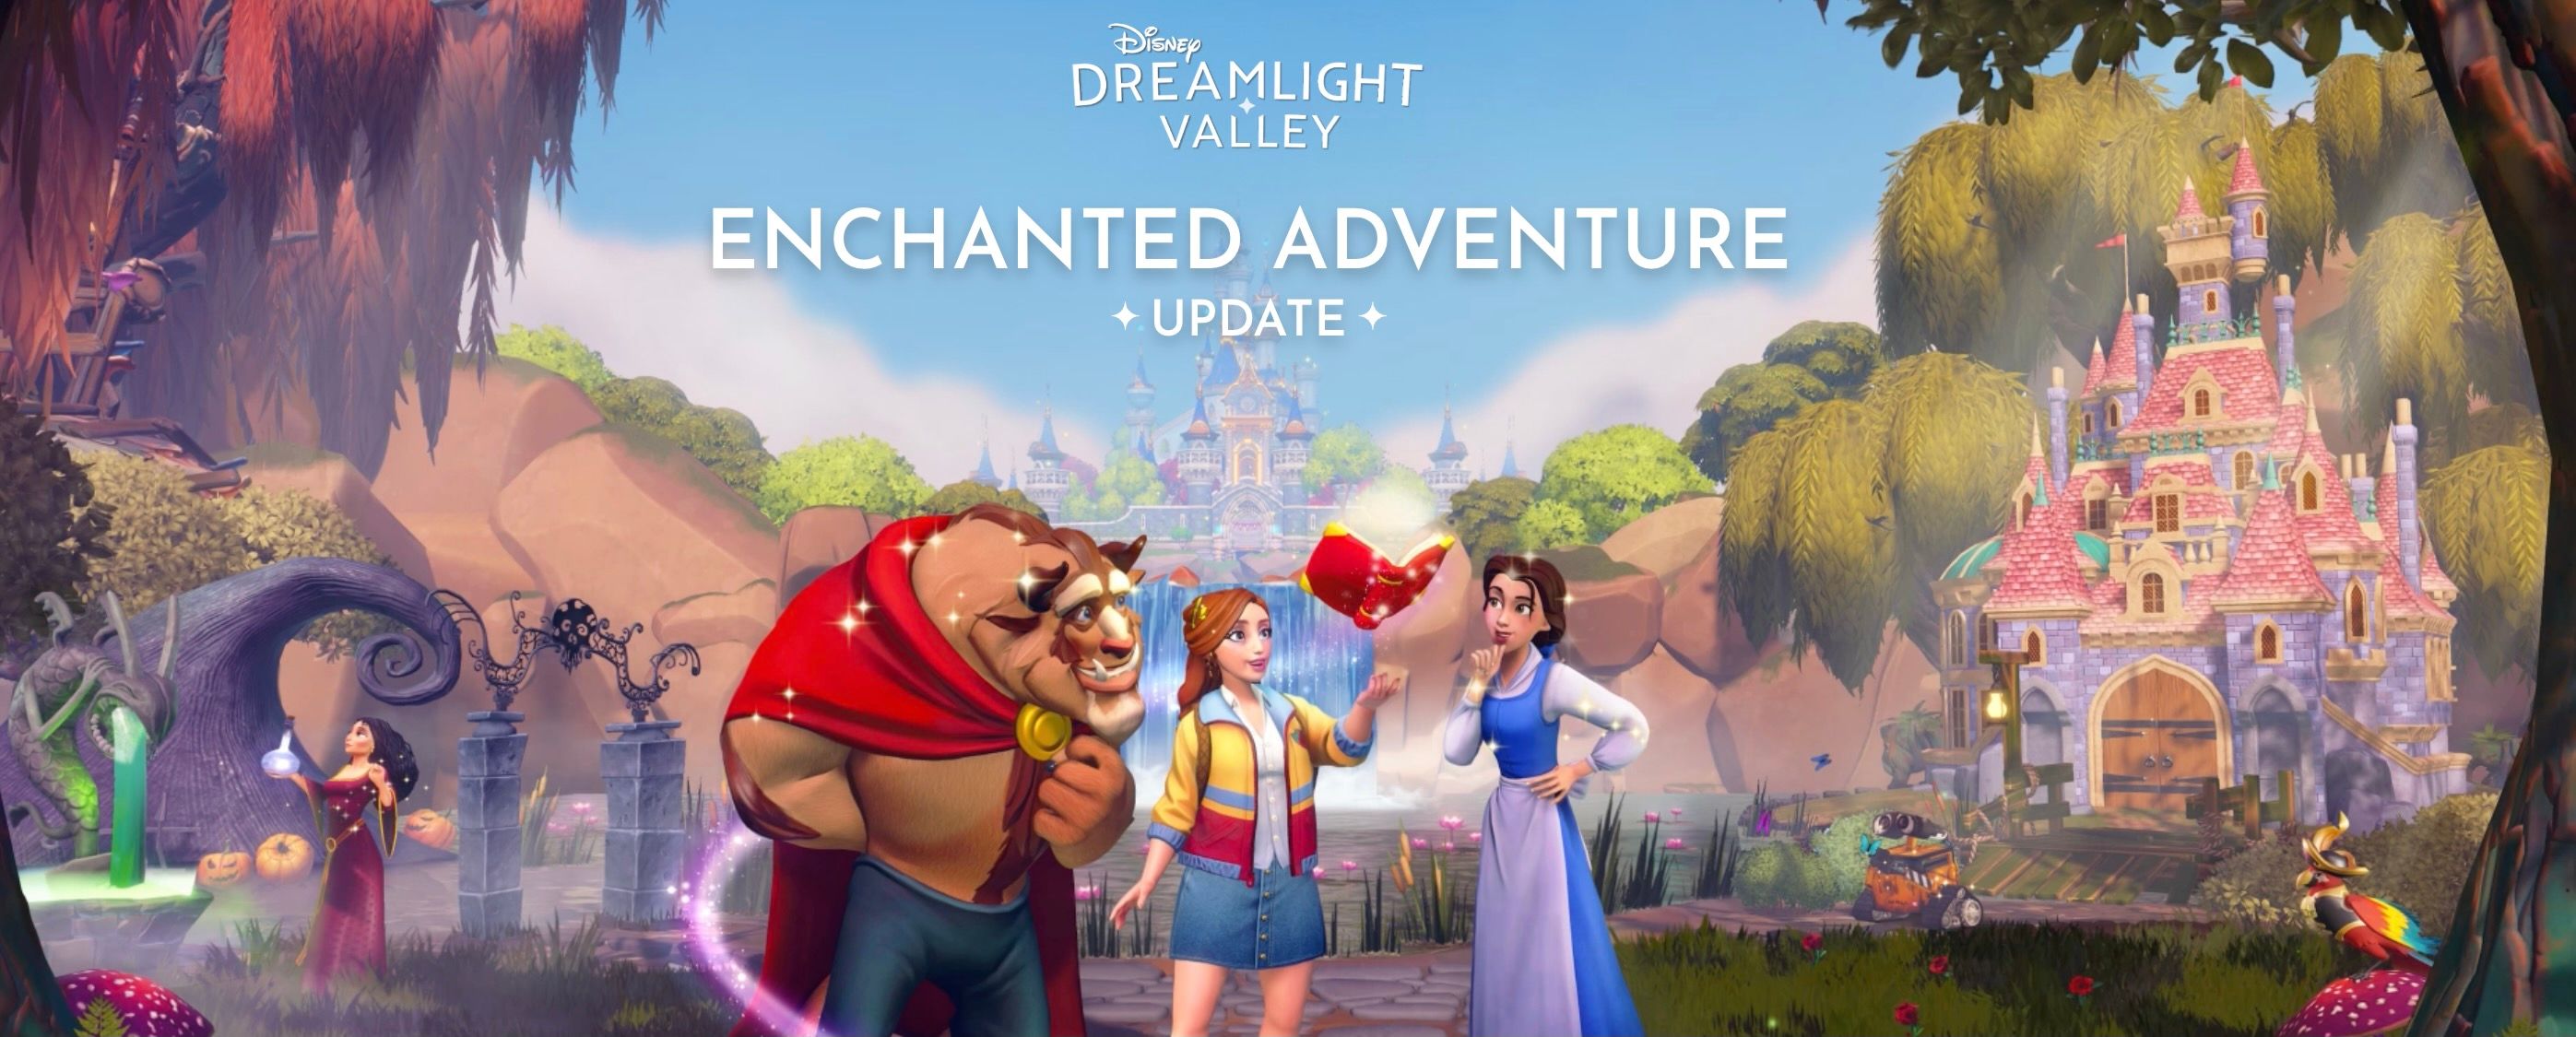 Beast and Belle with a player avatar on Disney Dreamlight Valley promotional artwork.